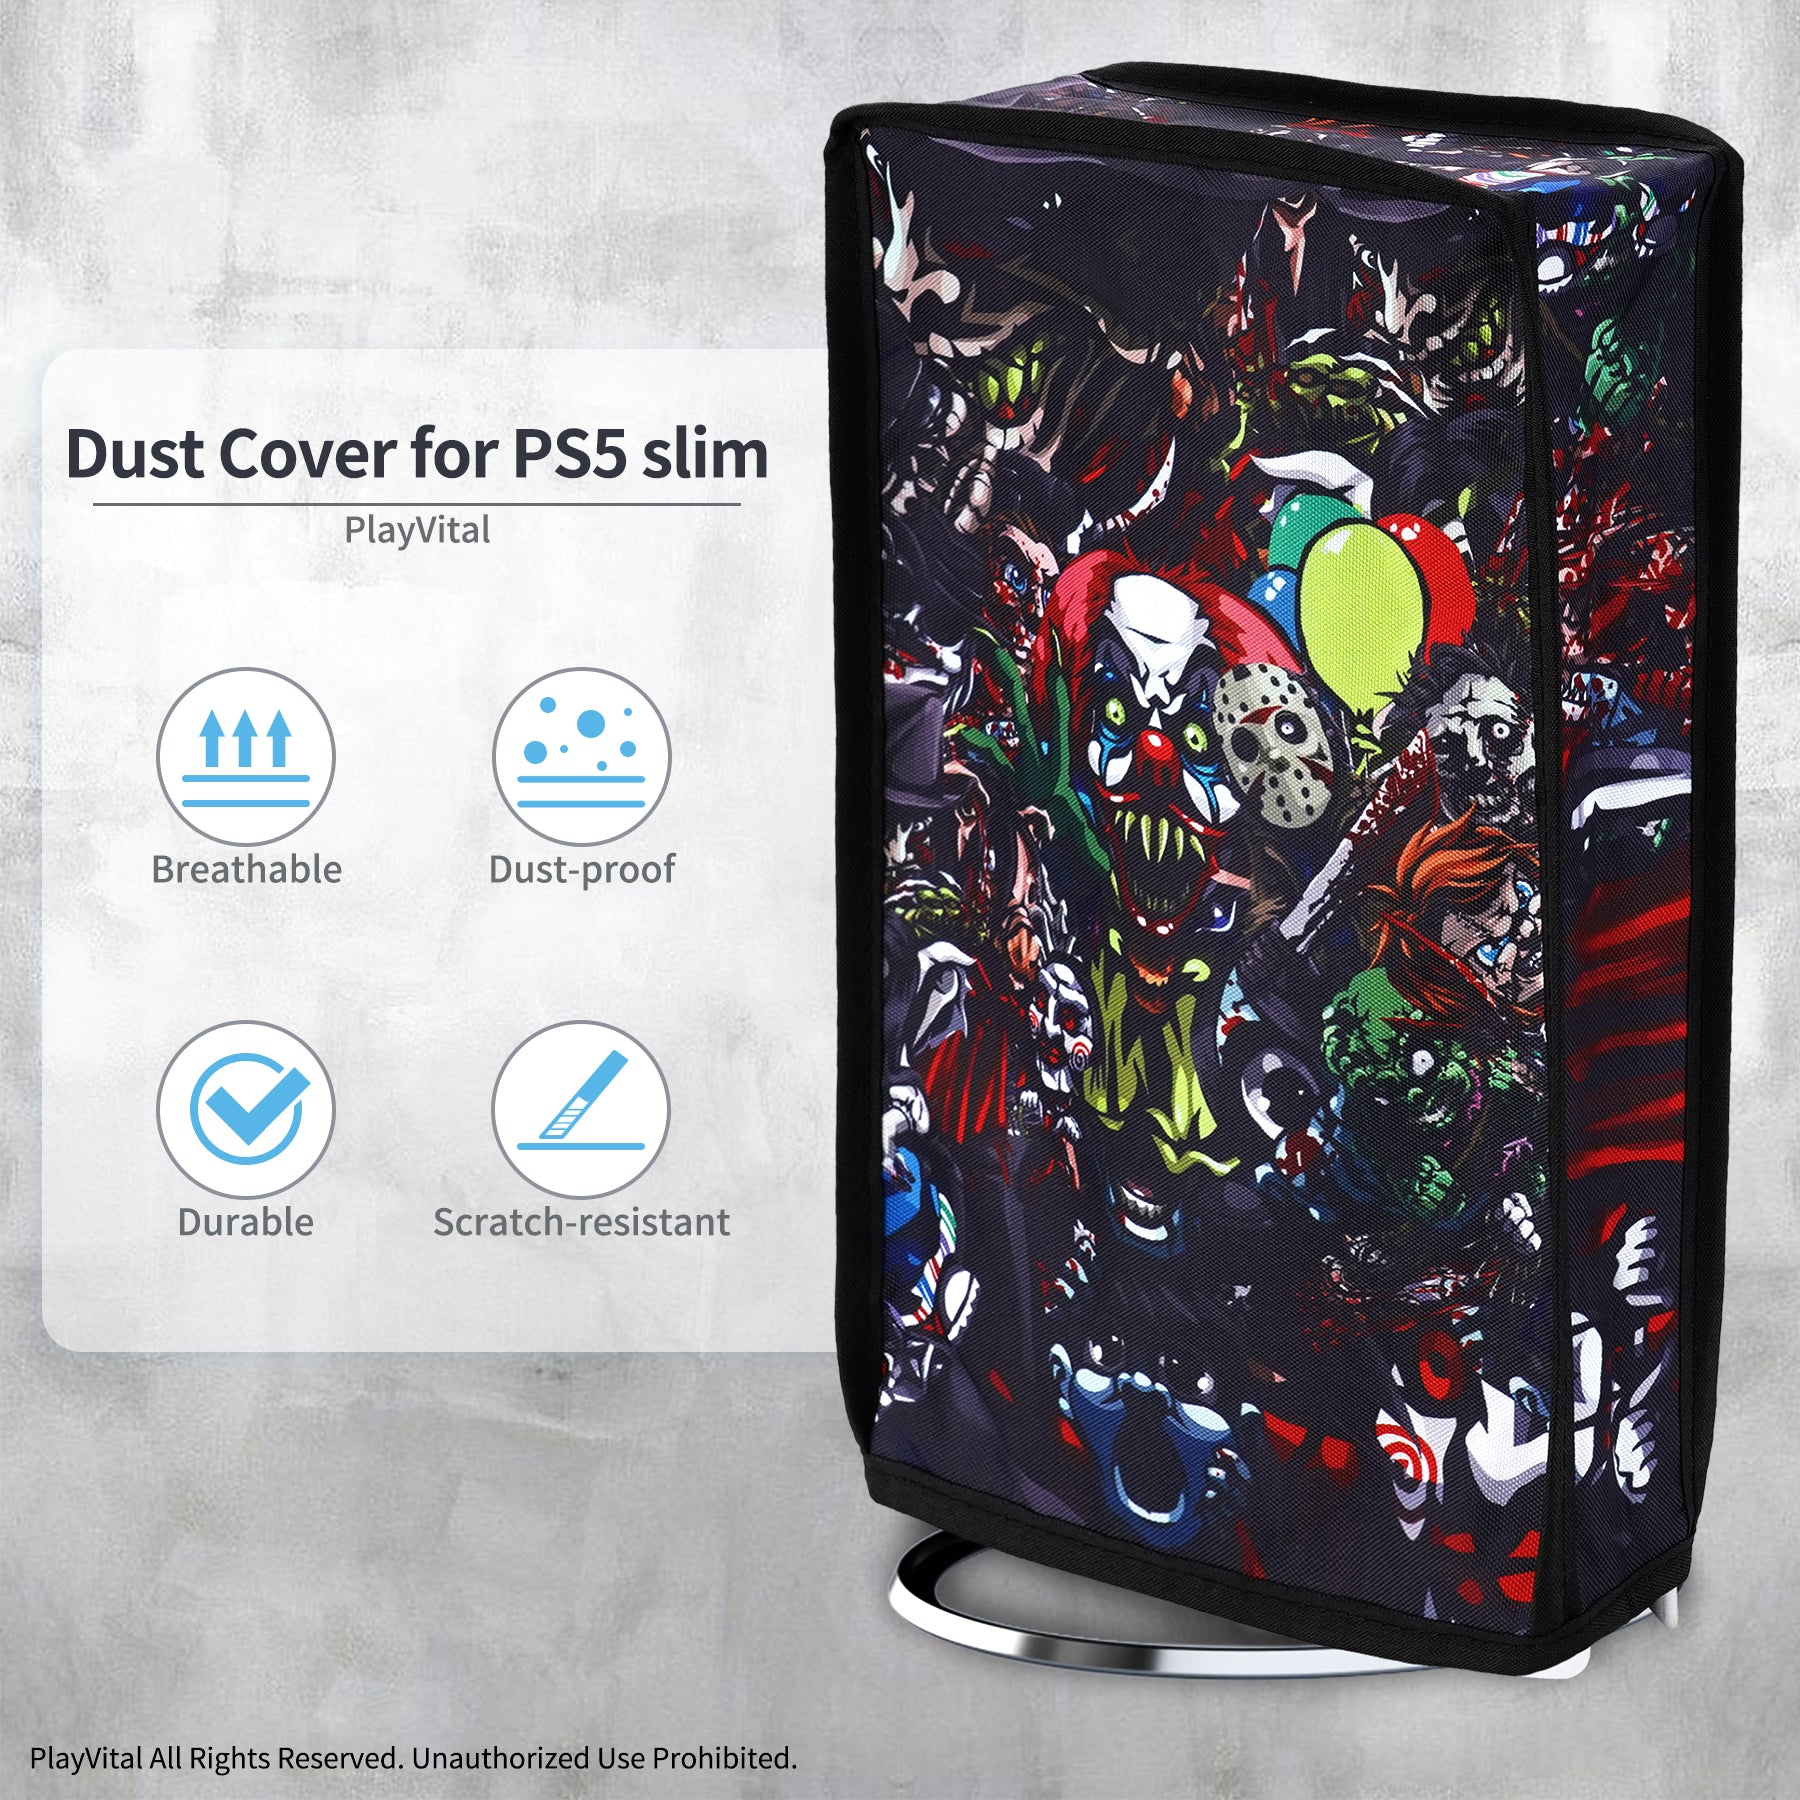 PlayVital Vertical Dust Cover for ps5 Slim Digital Edition(The New Smaller Design), Nylon Dust Proof Protector Waterproof Cover Sleeve for ps5 Slim Console - Scary Party - JKSPFH005 PlayVital